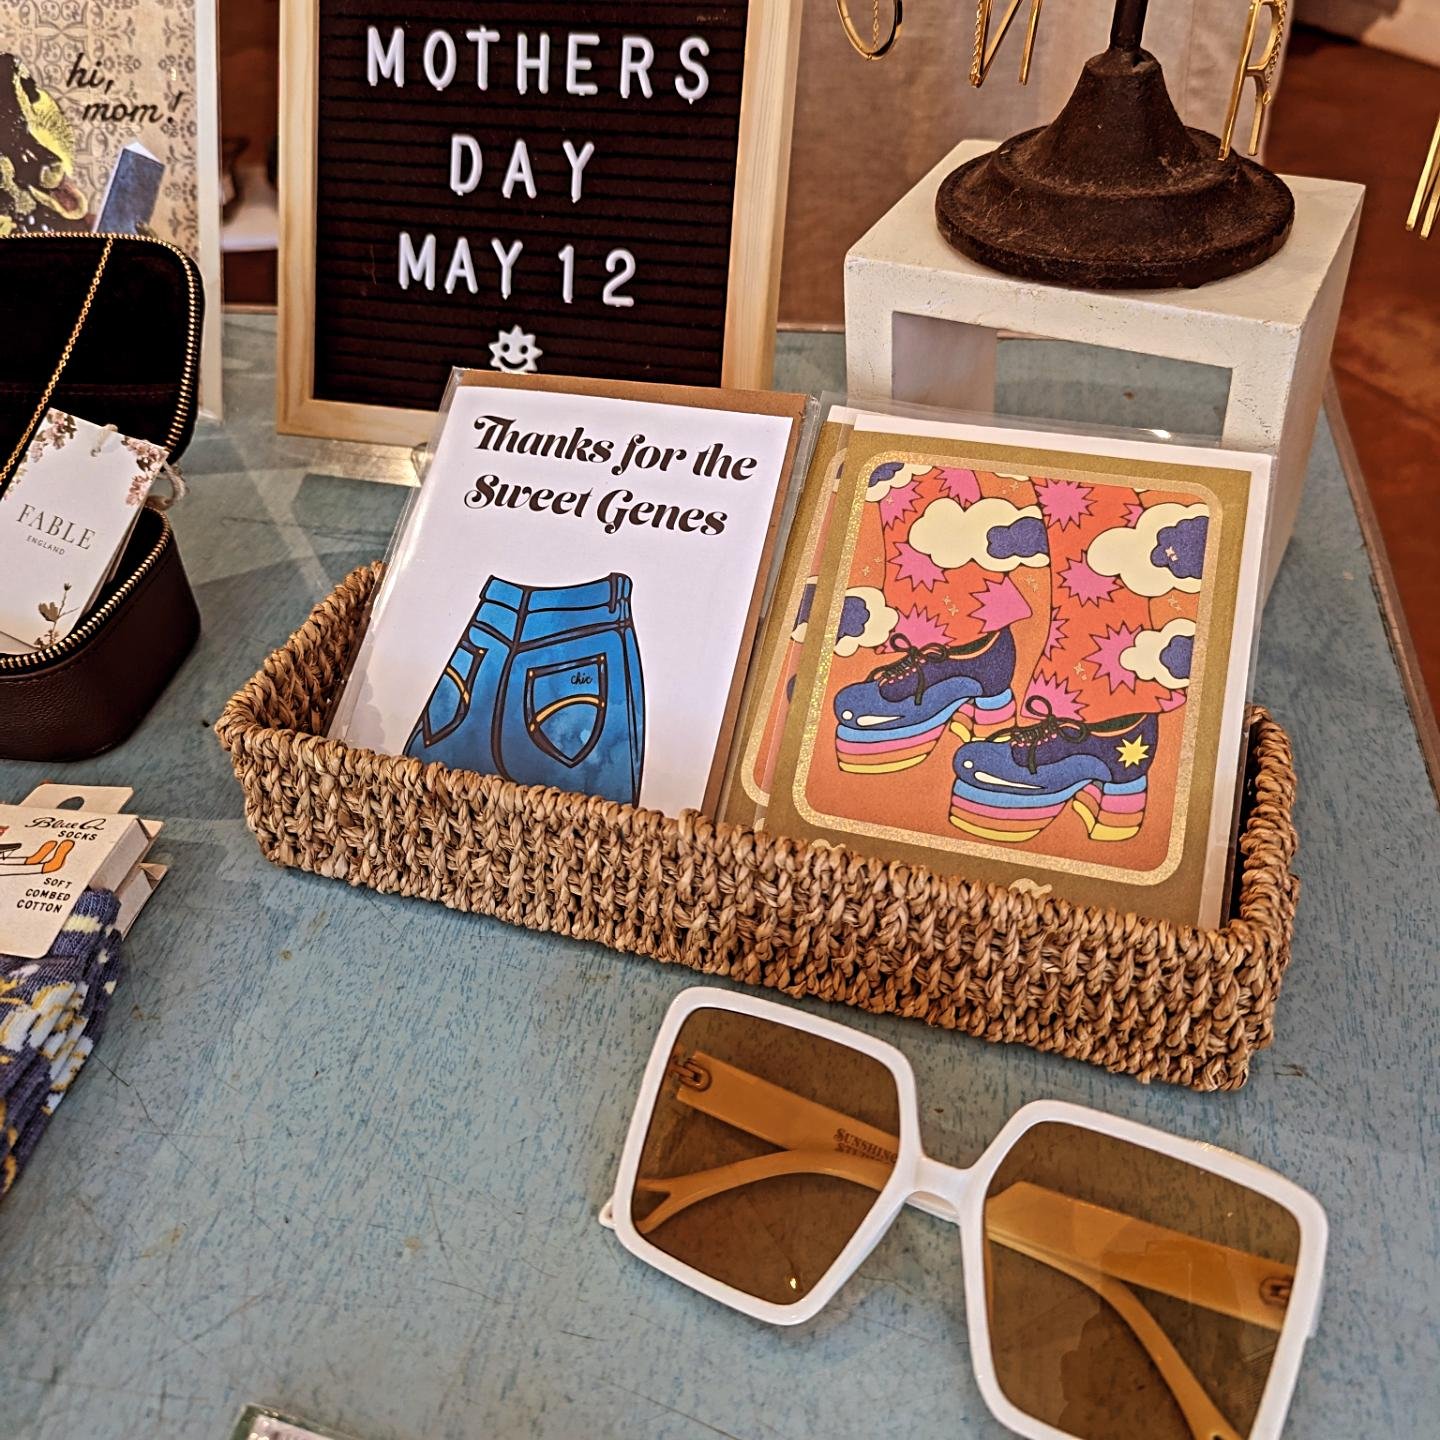 You can never truly thank mom enough for everything she has done for you over the years. But you know what? Getting her a thoughtful gift (or 8) for Mother's Day is a good start (it's this Sunday!!)

We're sure she'd also love a dinner out, sweet tre